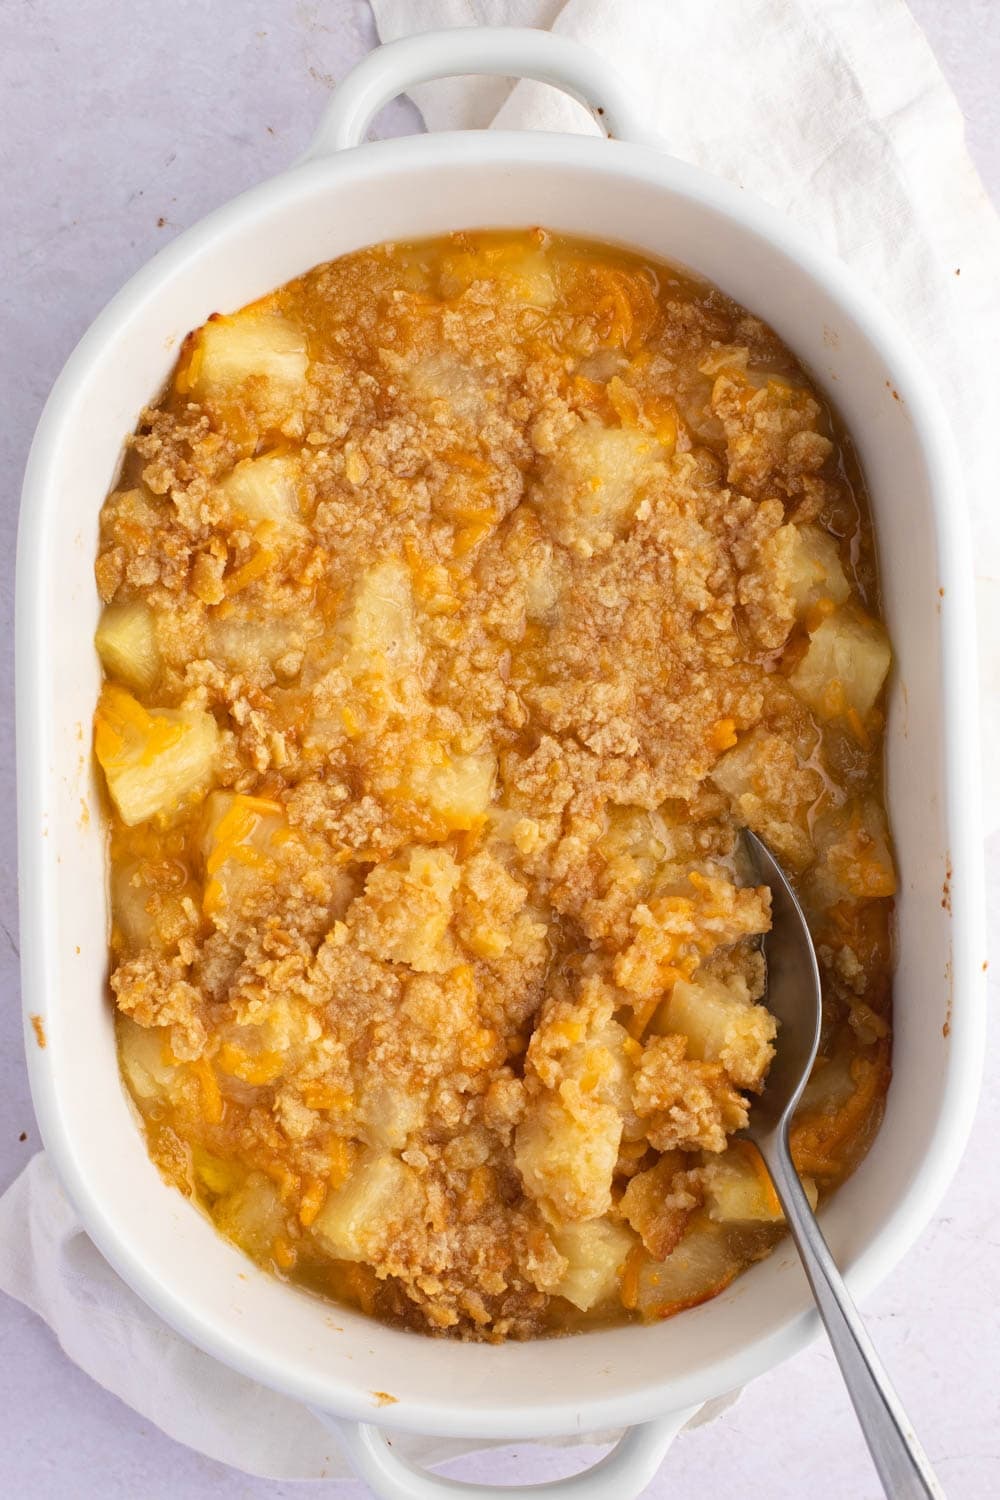 Top view of homemade Paula Deen pineapple casserole with a serving spoon.